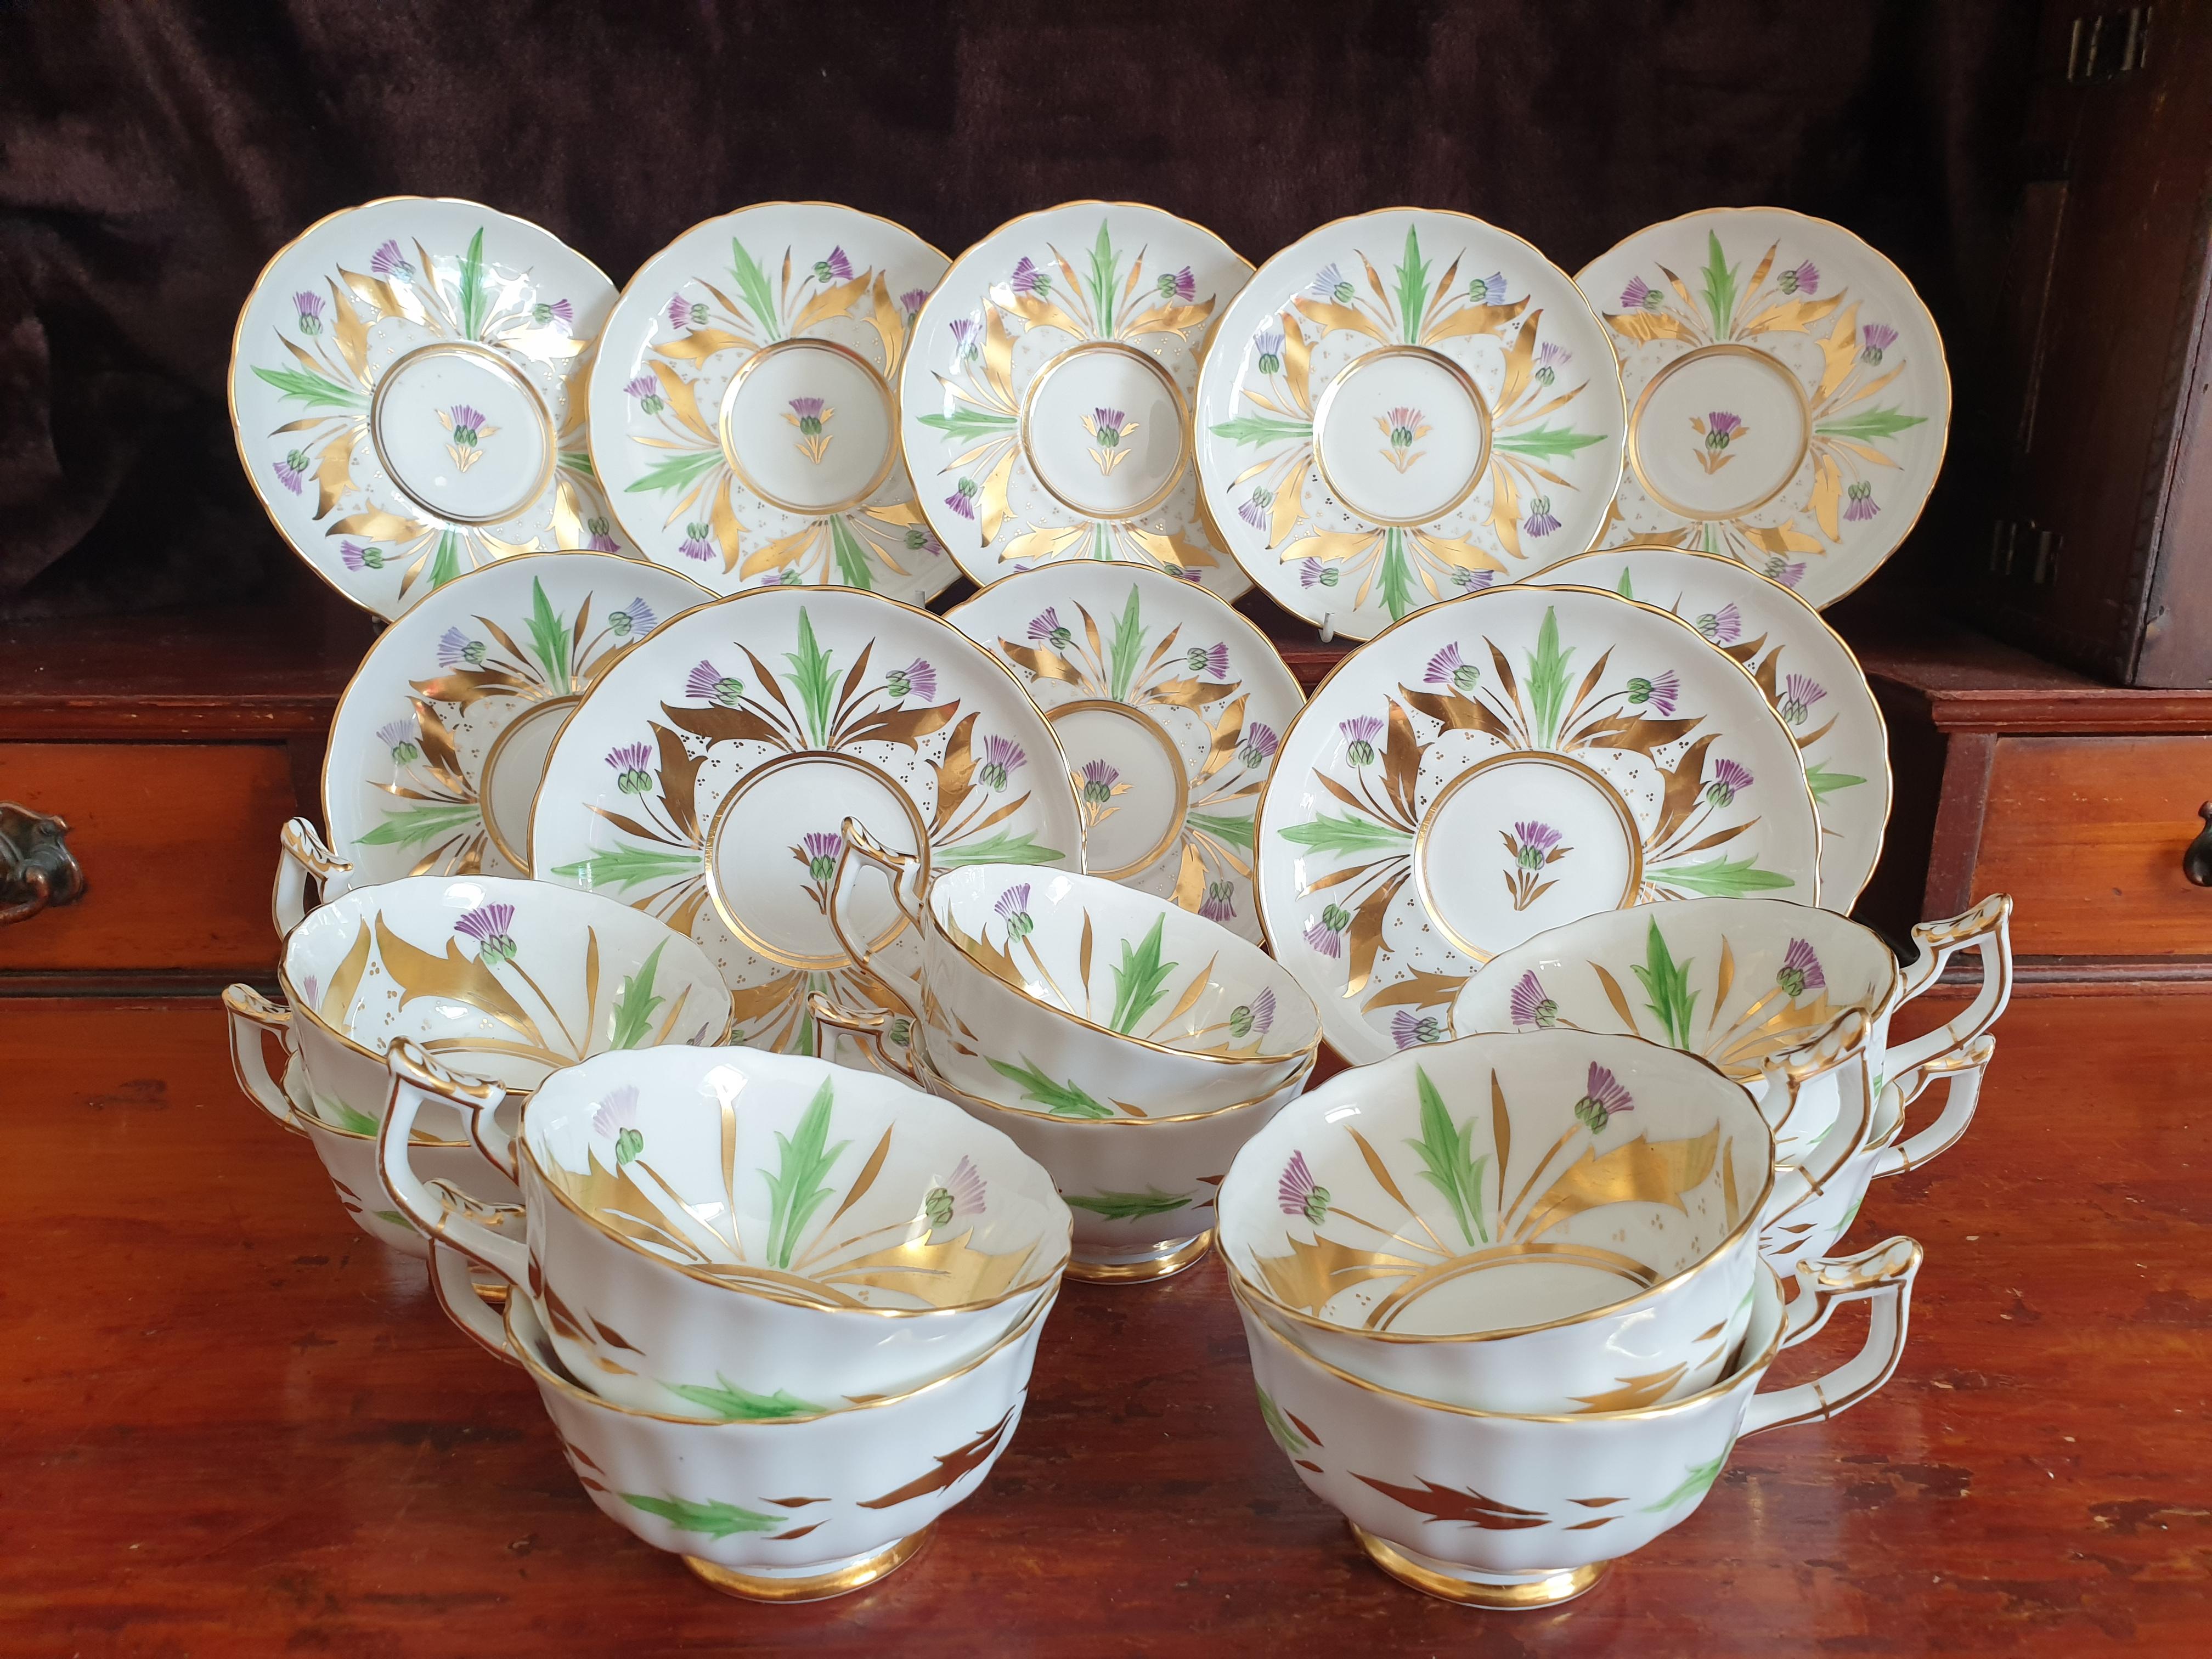 Royal Chelsea Art Deco 10 cups and matching saucers tea service. All handpainted with richly decorated with gilt leaves with further floral decorations in pastel green and purple inside the walls of the cups, saucers and to the centre of